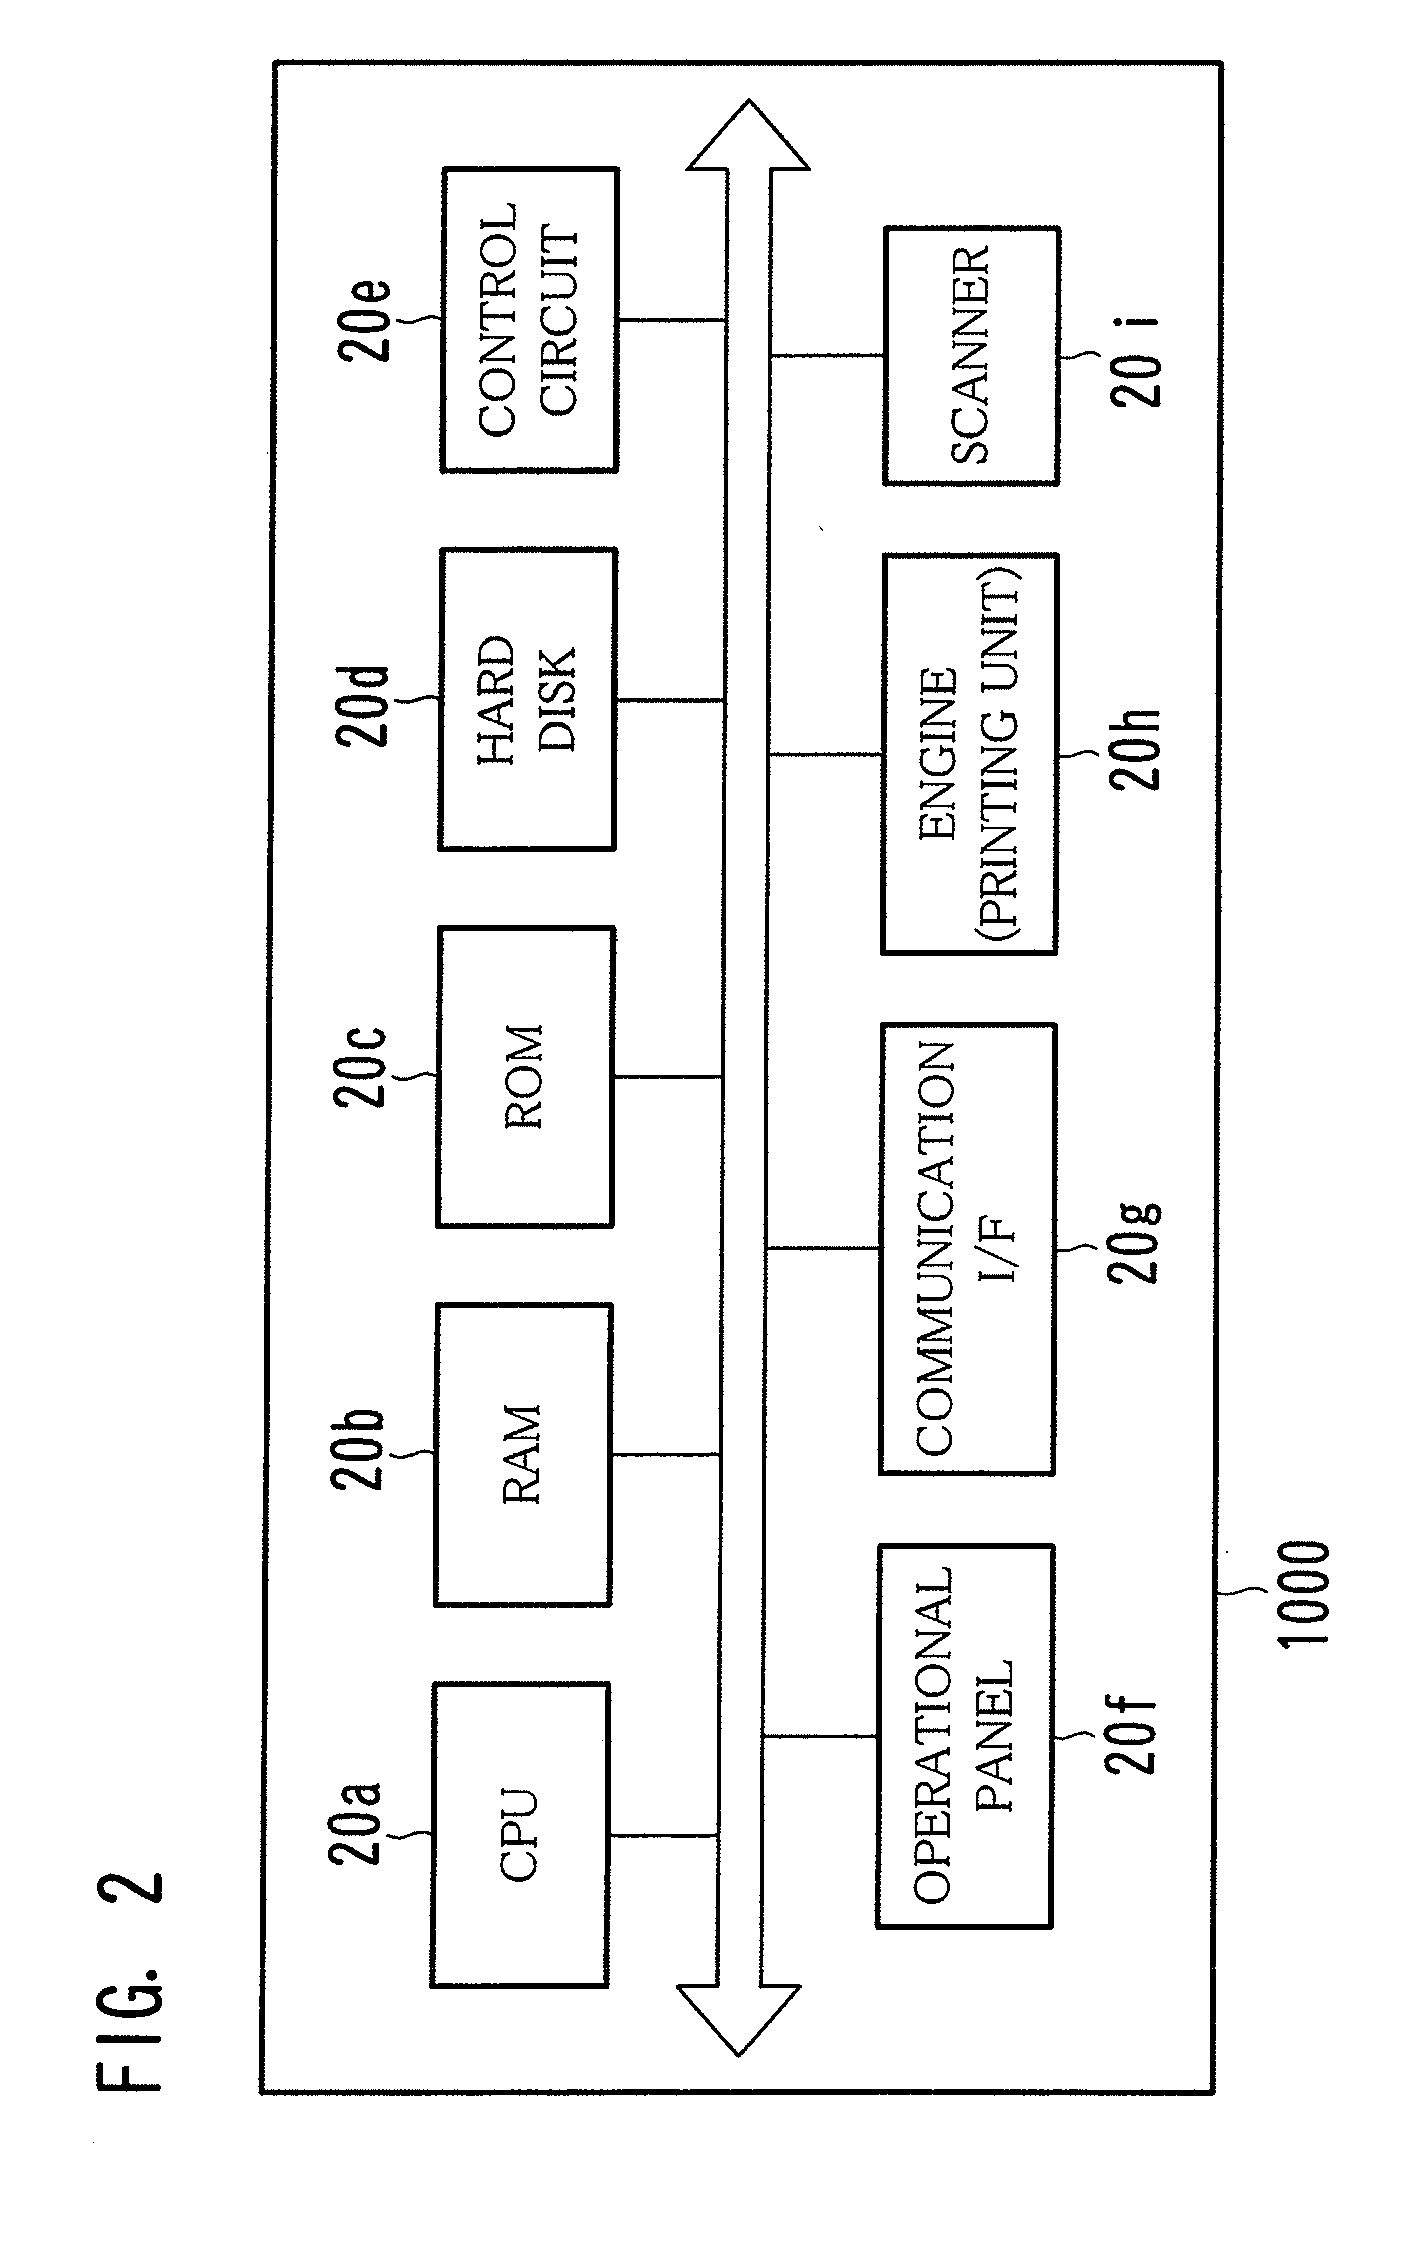 Image processing apparatus, method for displaying interface screen, and computer-readable storage medium for computer program